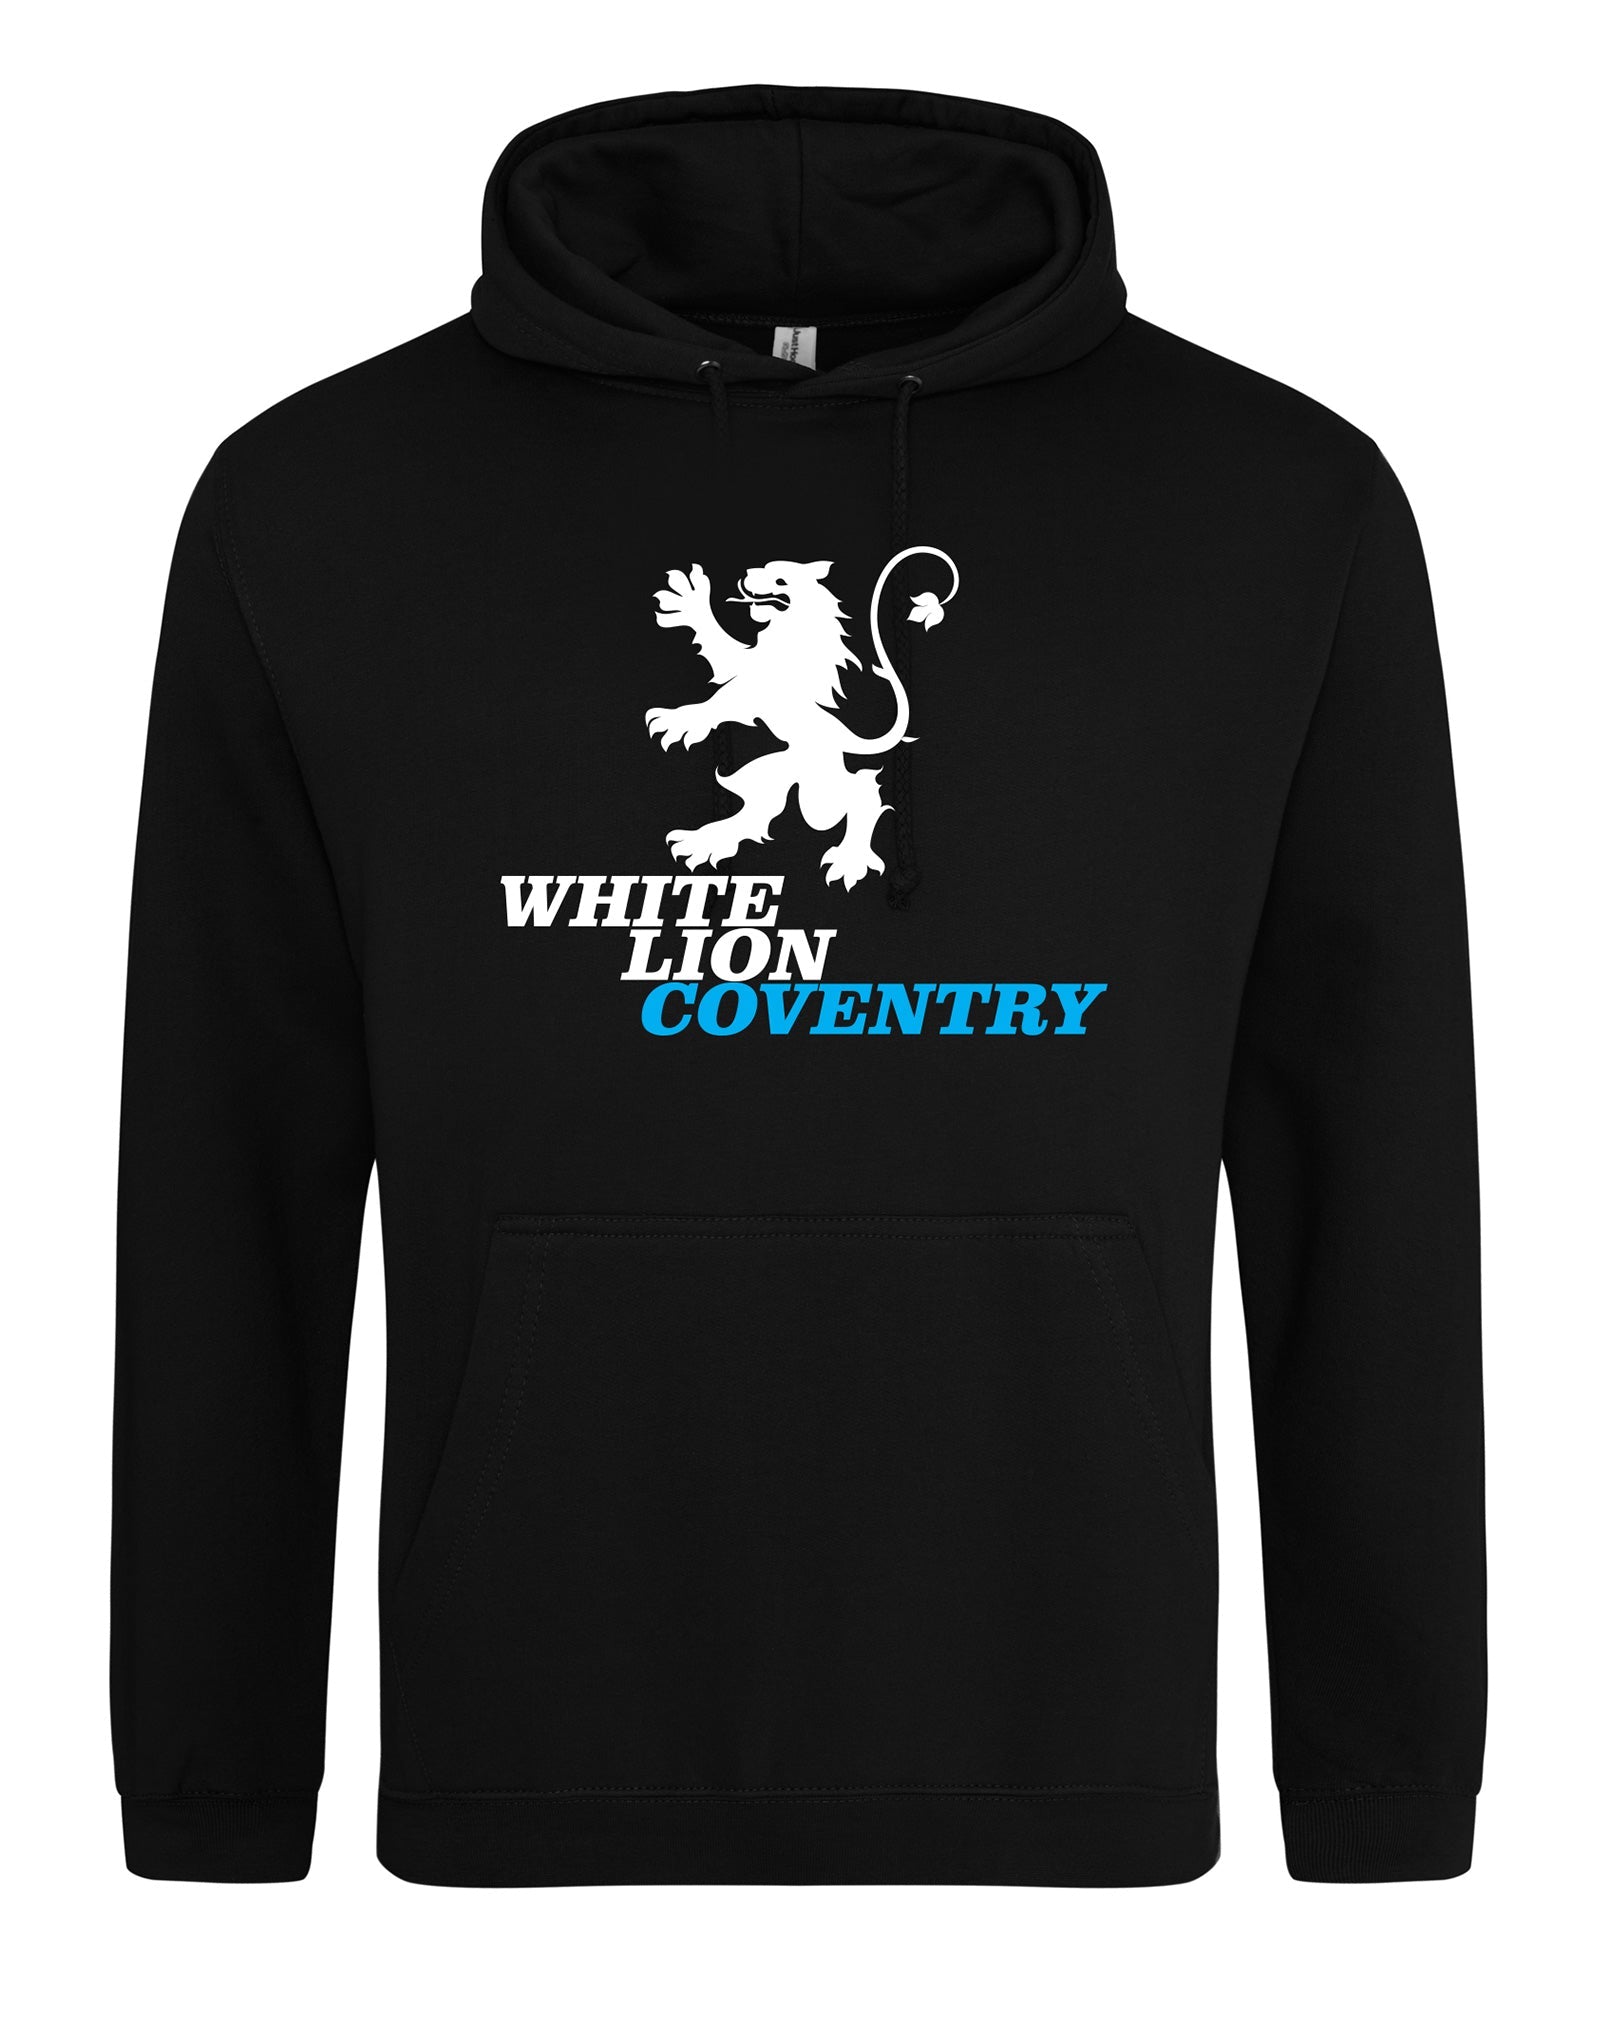 White Lion unisex fit hoodie - various colours - Dirty Stop Outs